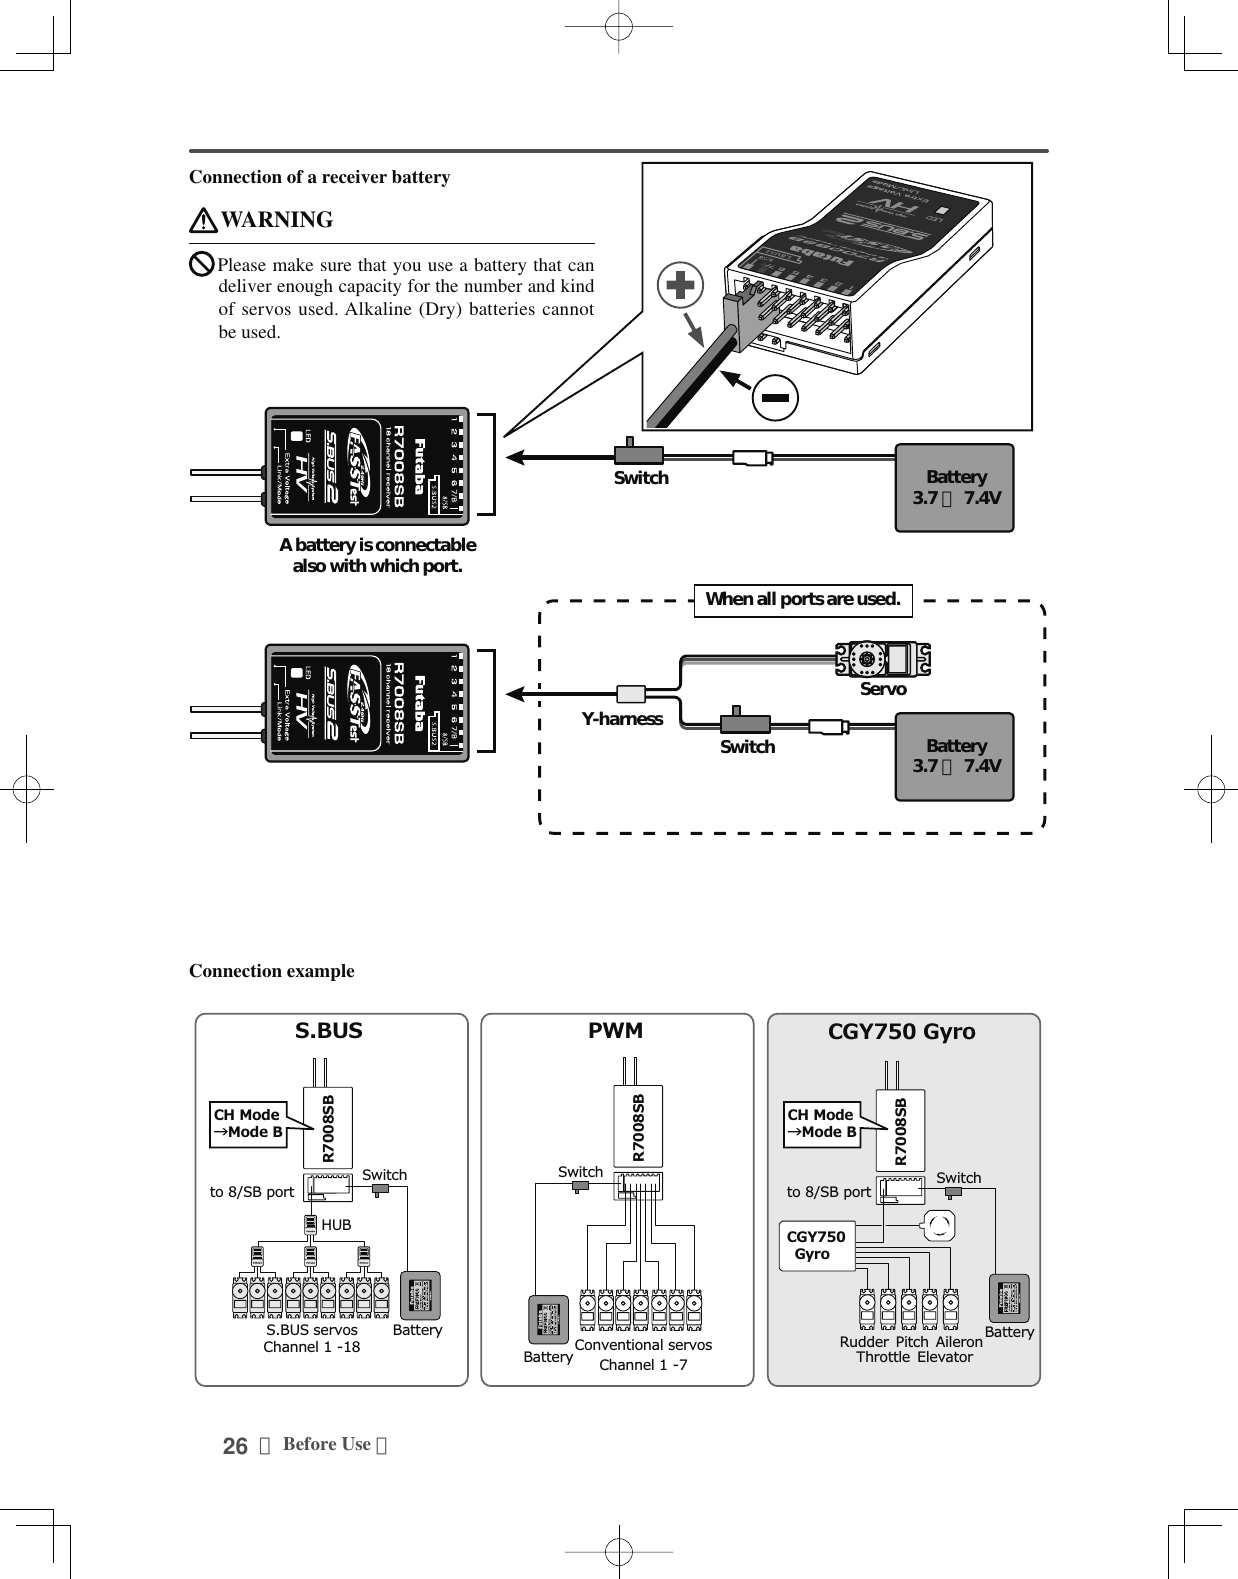 26 ＜Before Use ＞Connection of a receiver battery Connection example Battery3.7 ∼ 7.4VSwitchServoY-harnessWhen all ports are used.Battery3.7 ∼ 7.4VSwitchA battery is connectable also with which port.&amp;KDQQHO56%&amp;RQYHQWLRQDOVHUYRV%DWWHU\6ZLWFK3:056%%DWWHU\+8%6%86VHUYRV&amp;KDQQHO6ZLWFKWR6%SRUW6%86&amp;+0RGHڀ0RGH%56%%DWWHU\$LOHURQ3LWFK5XGGHU(OHYDWRU7KURWWOH6ZLWFK&amp;*&lt;*\UR&amp;*&lt;*\UR&amp;+0RGHڀ0RGH%WR6%SRUWWARNINGPlease make sure that you use a battery that can deliver enough capacity for the number and kind of servos used. Alkaline (Dry) batteries cannot be used.